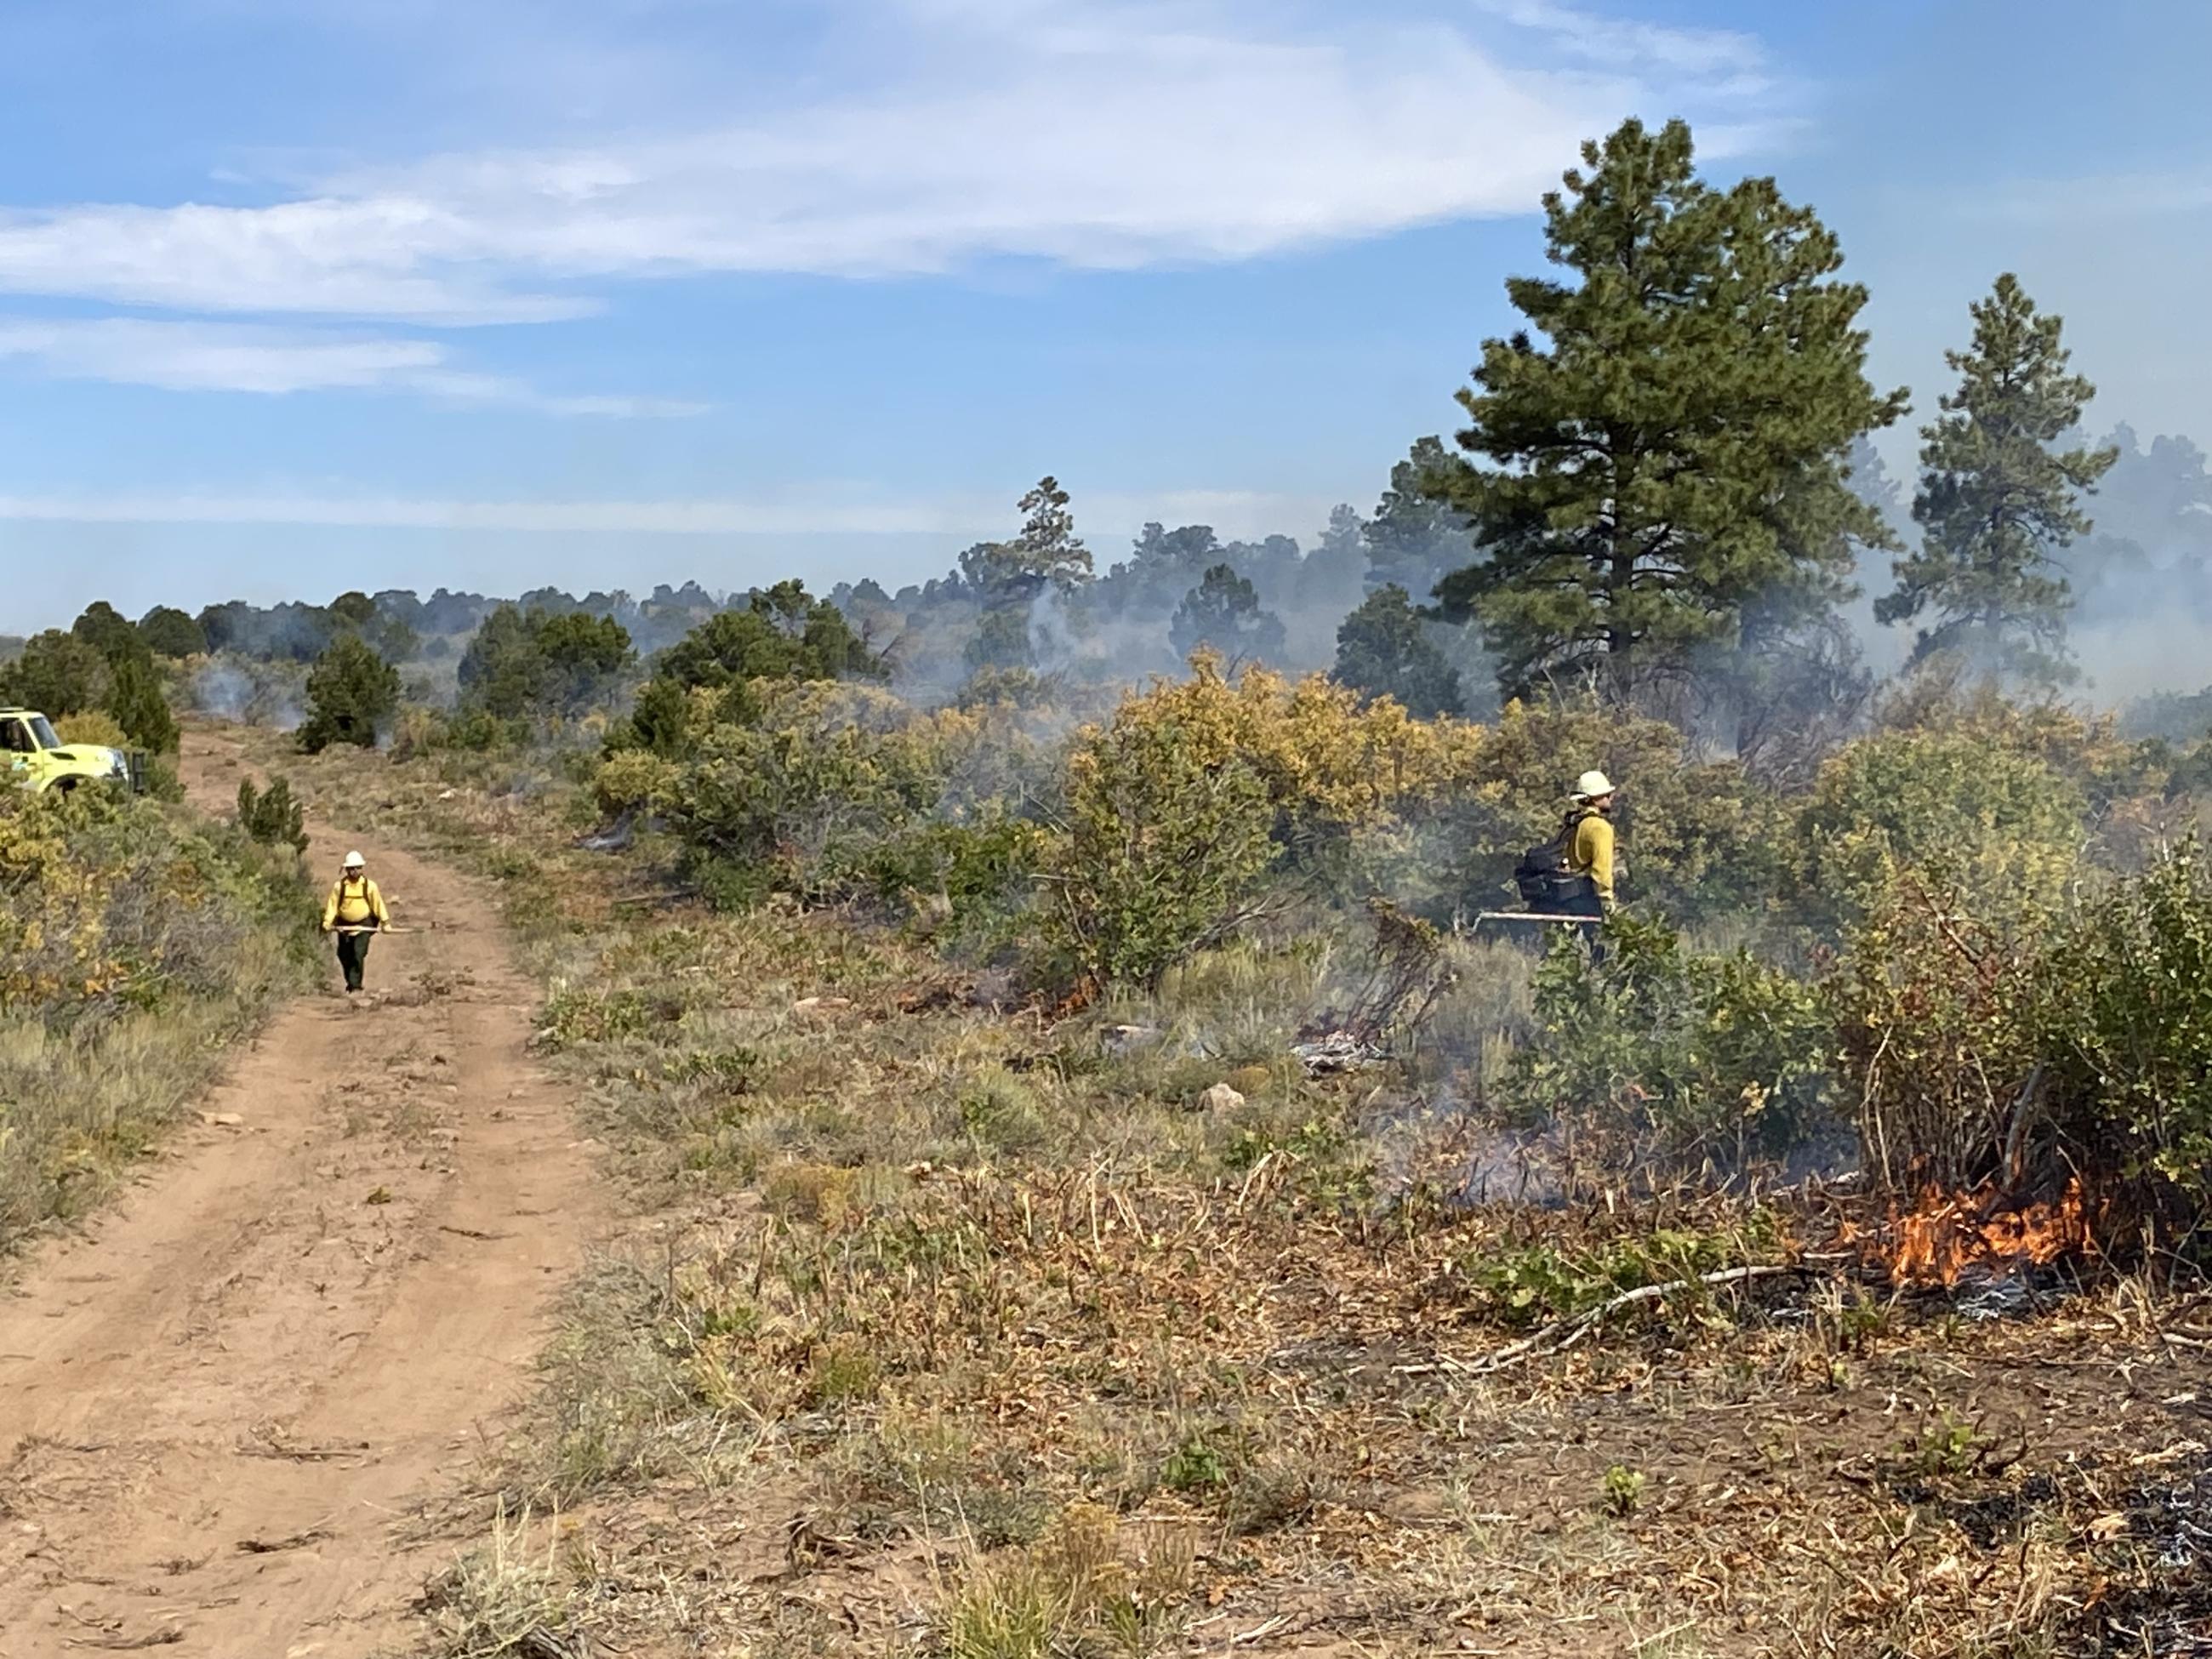 Image of two firefighters and fire engine checking the prescribed fire area along the road.